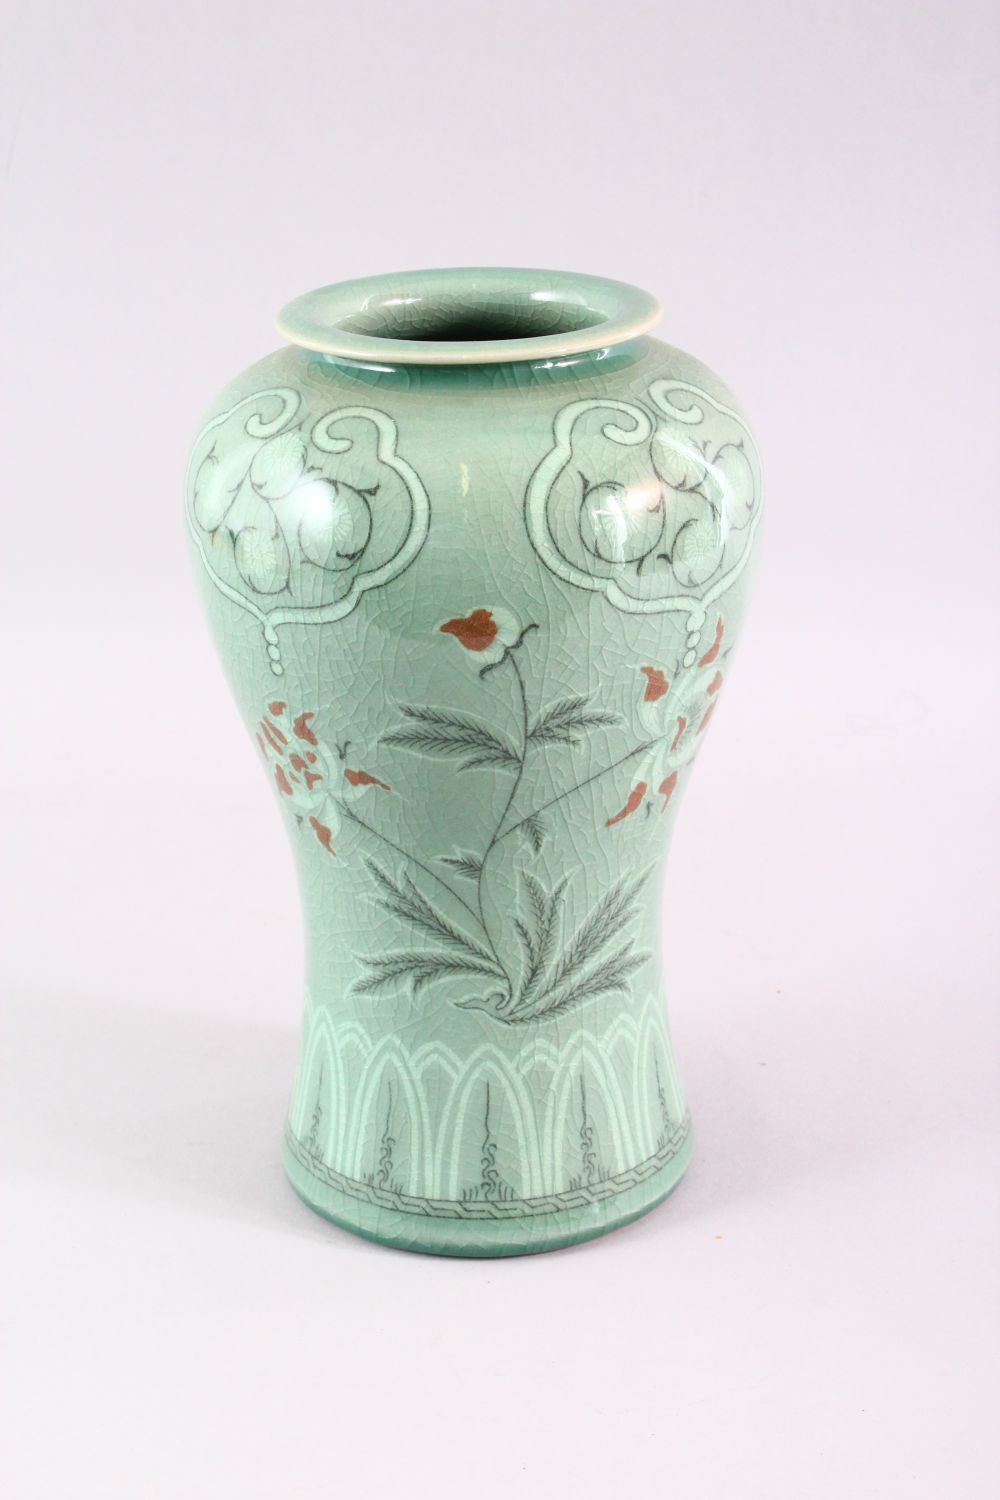 THREE 20TH CENTURY KOREAN CELADON PORCELAIN TEA SET, the body decorated with formal floral - Image 4 of 6